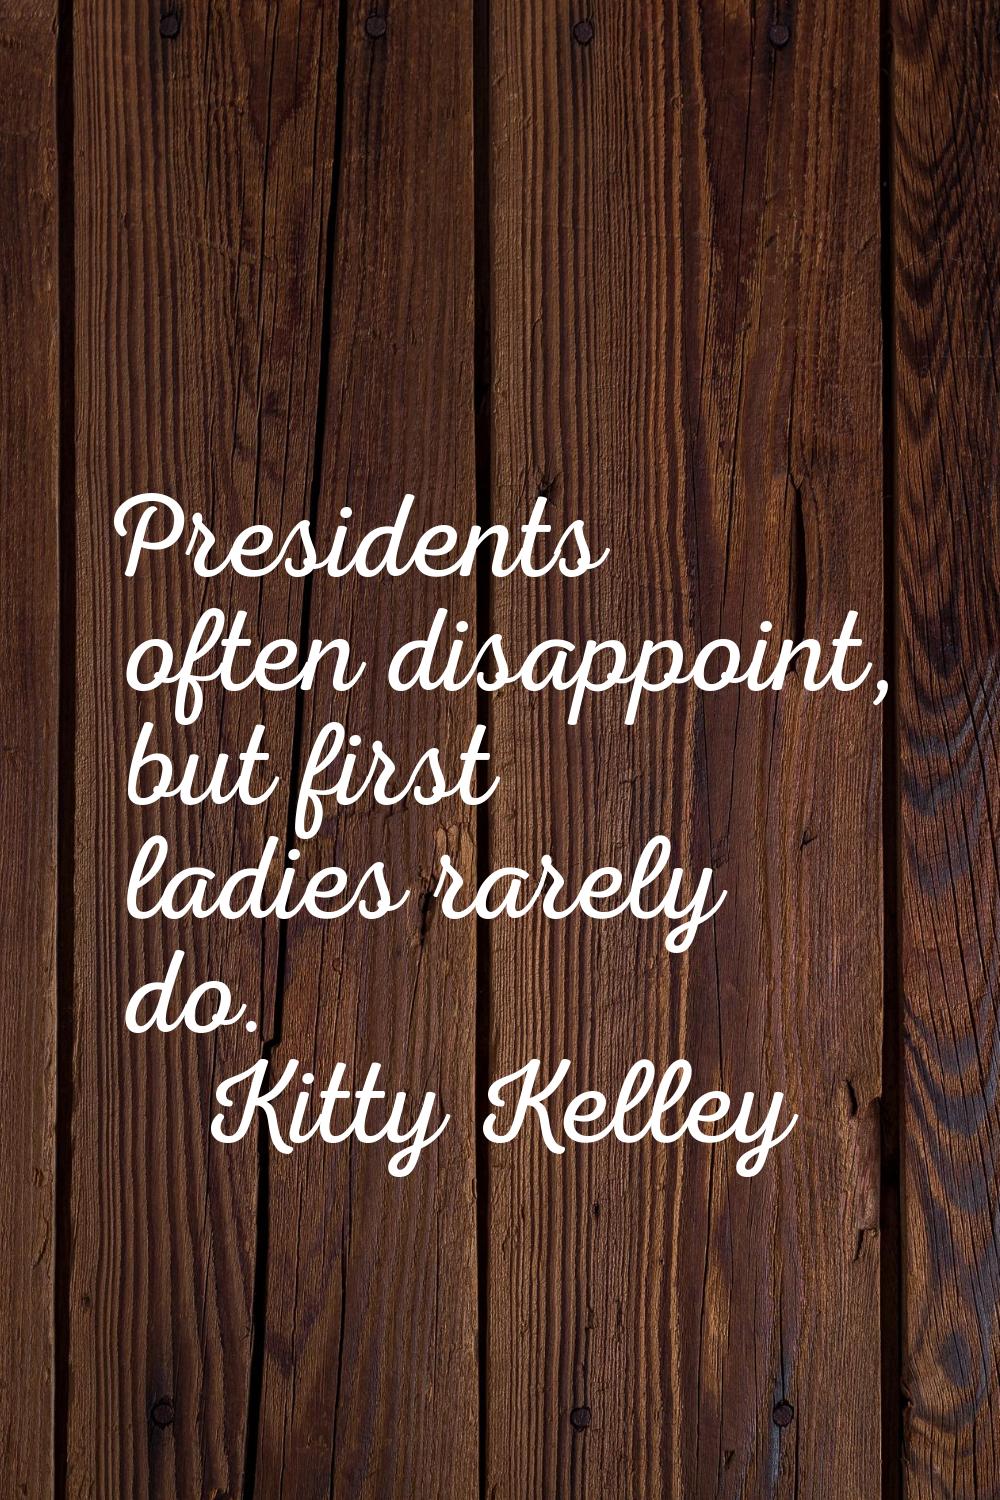 Presidents often disappoint, but first ladies rarely do.